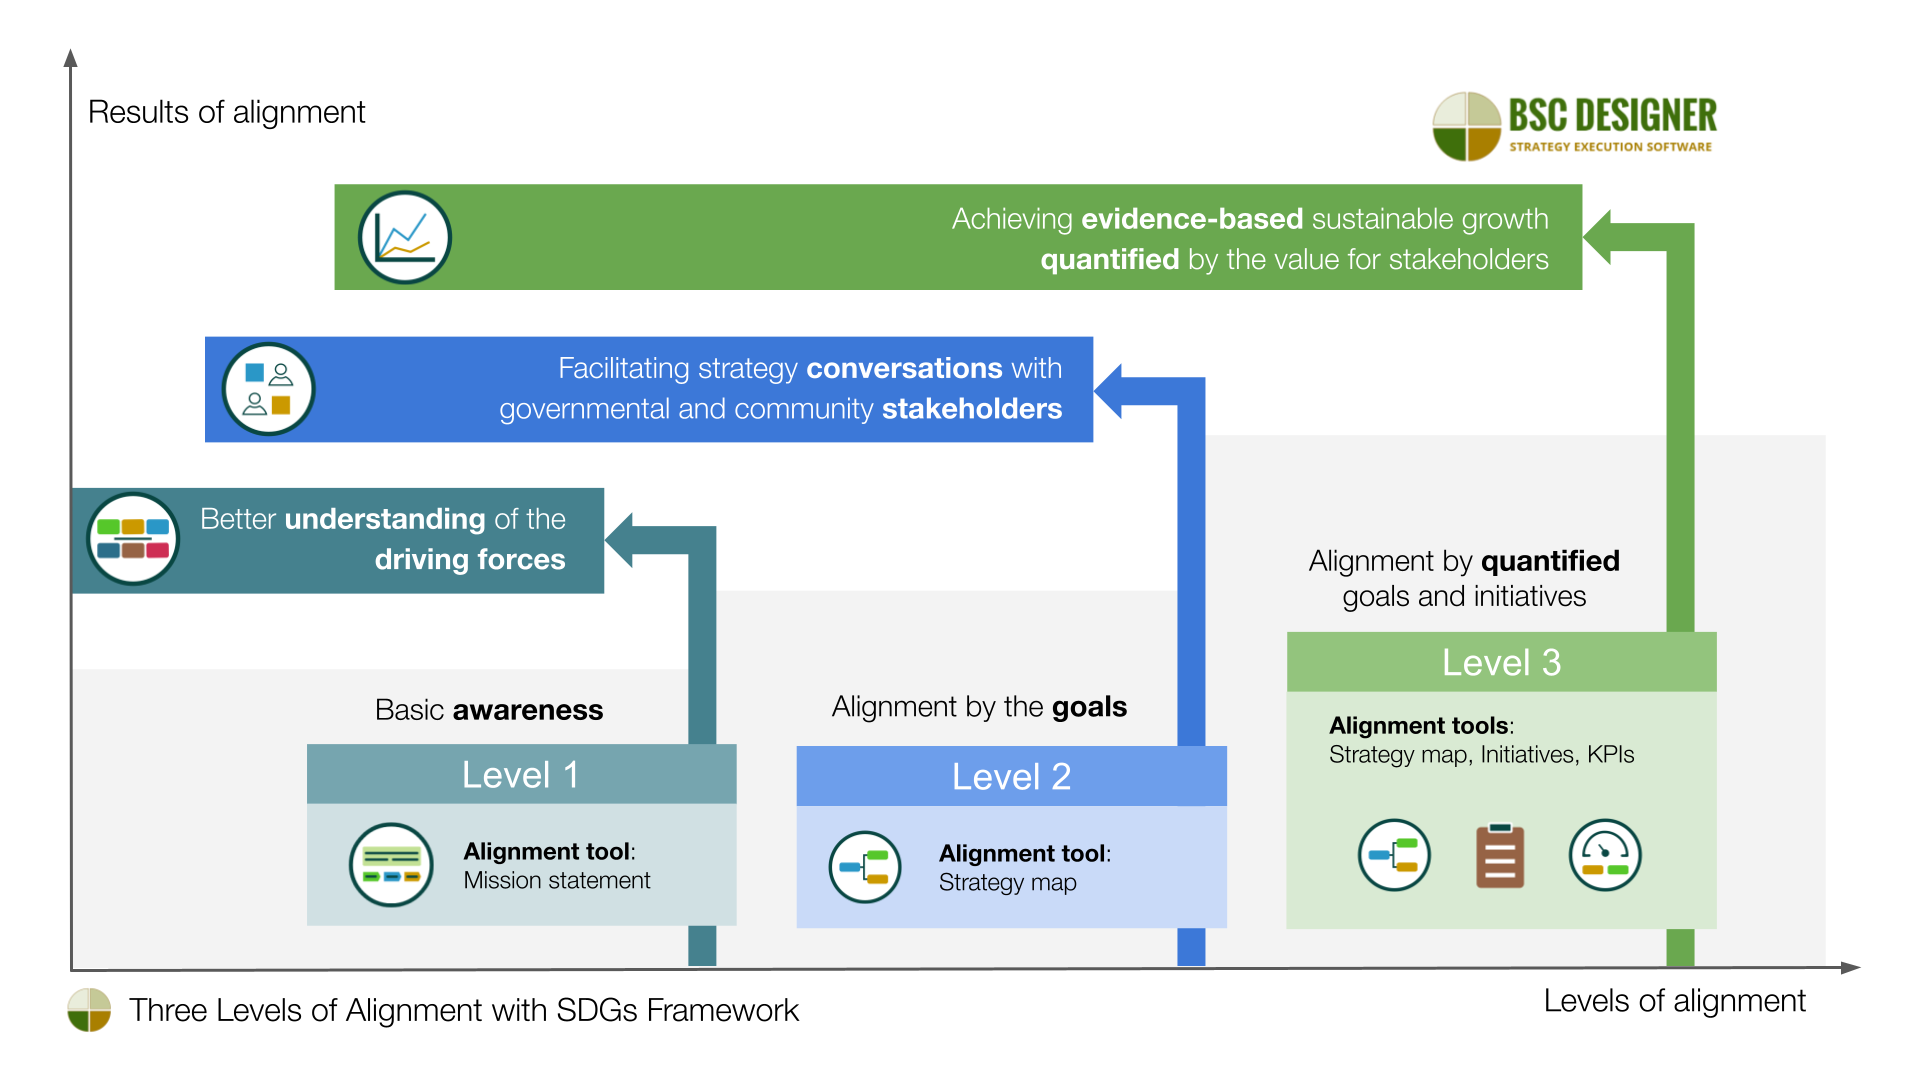 Three Levels of Alignment with SDGs Framework